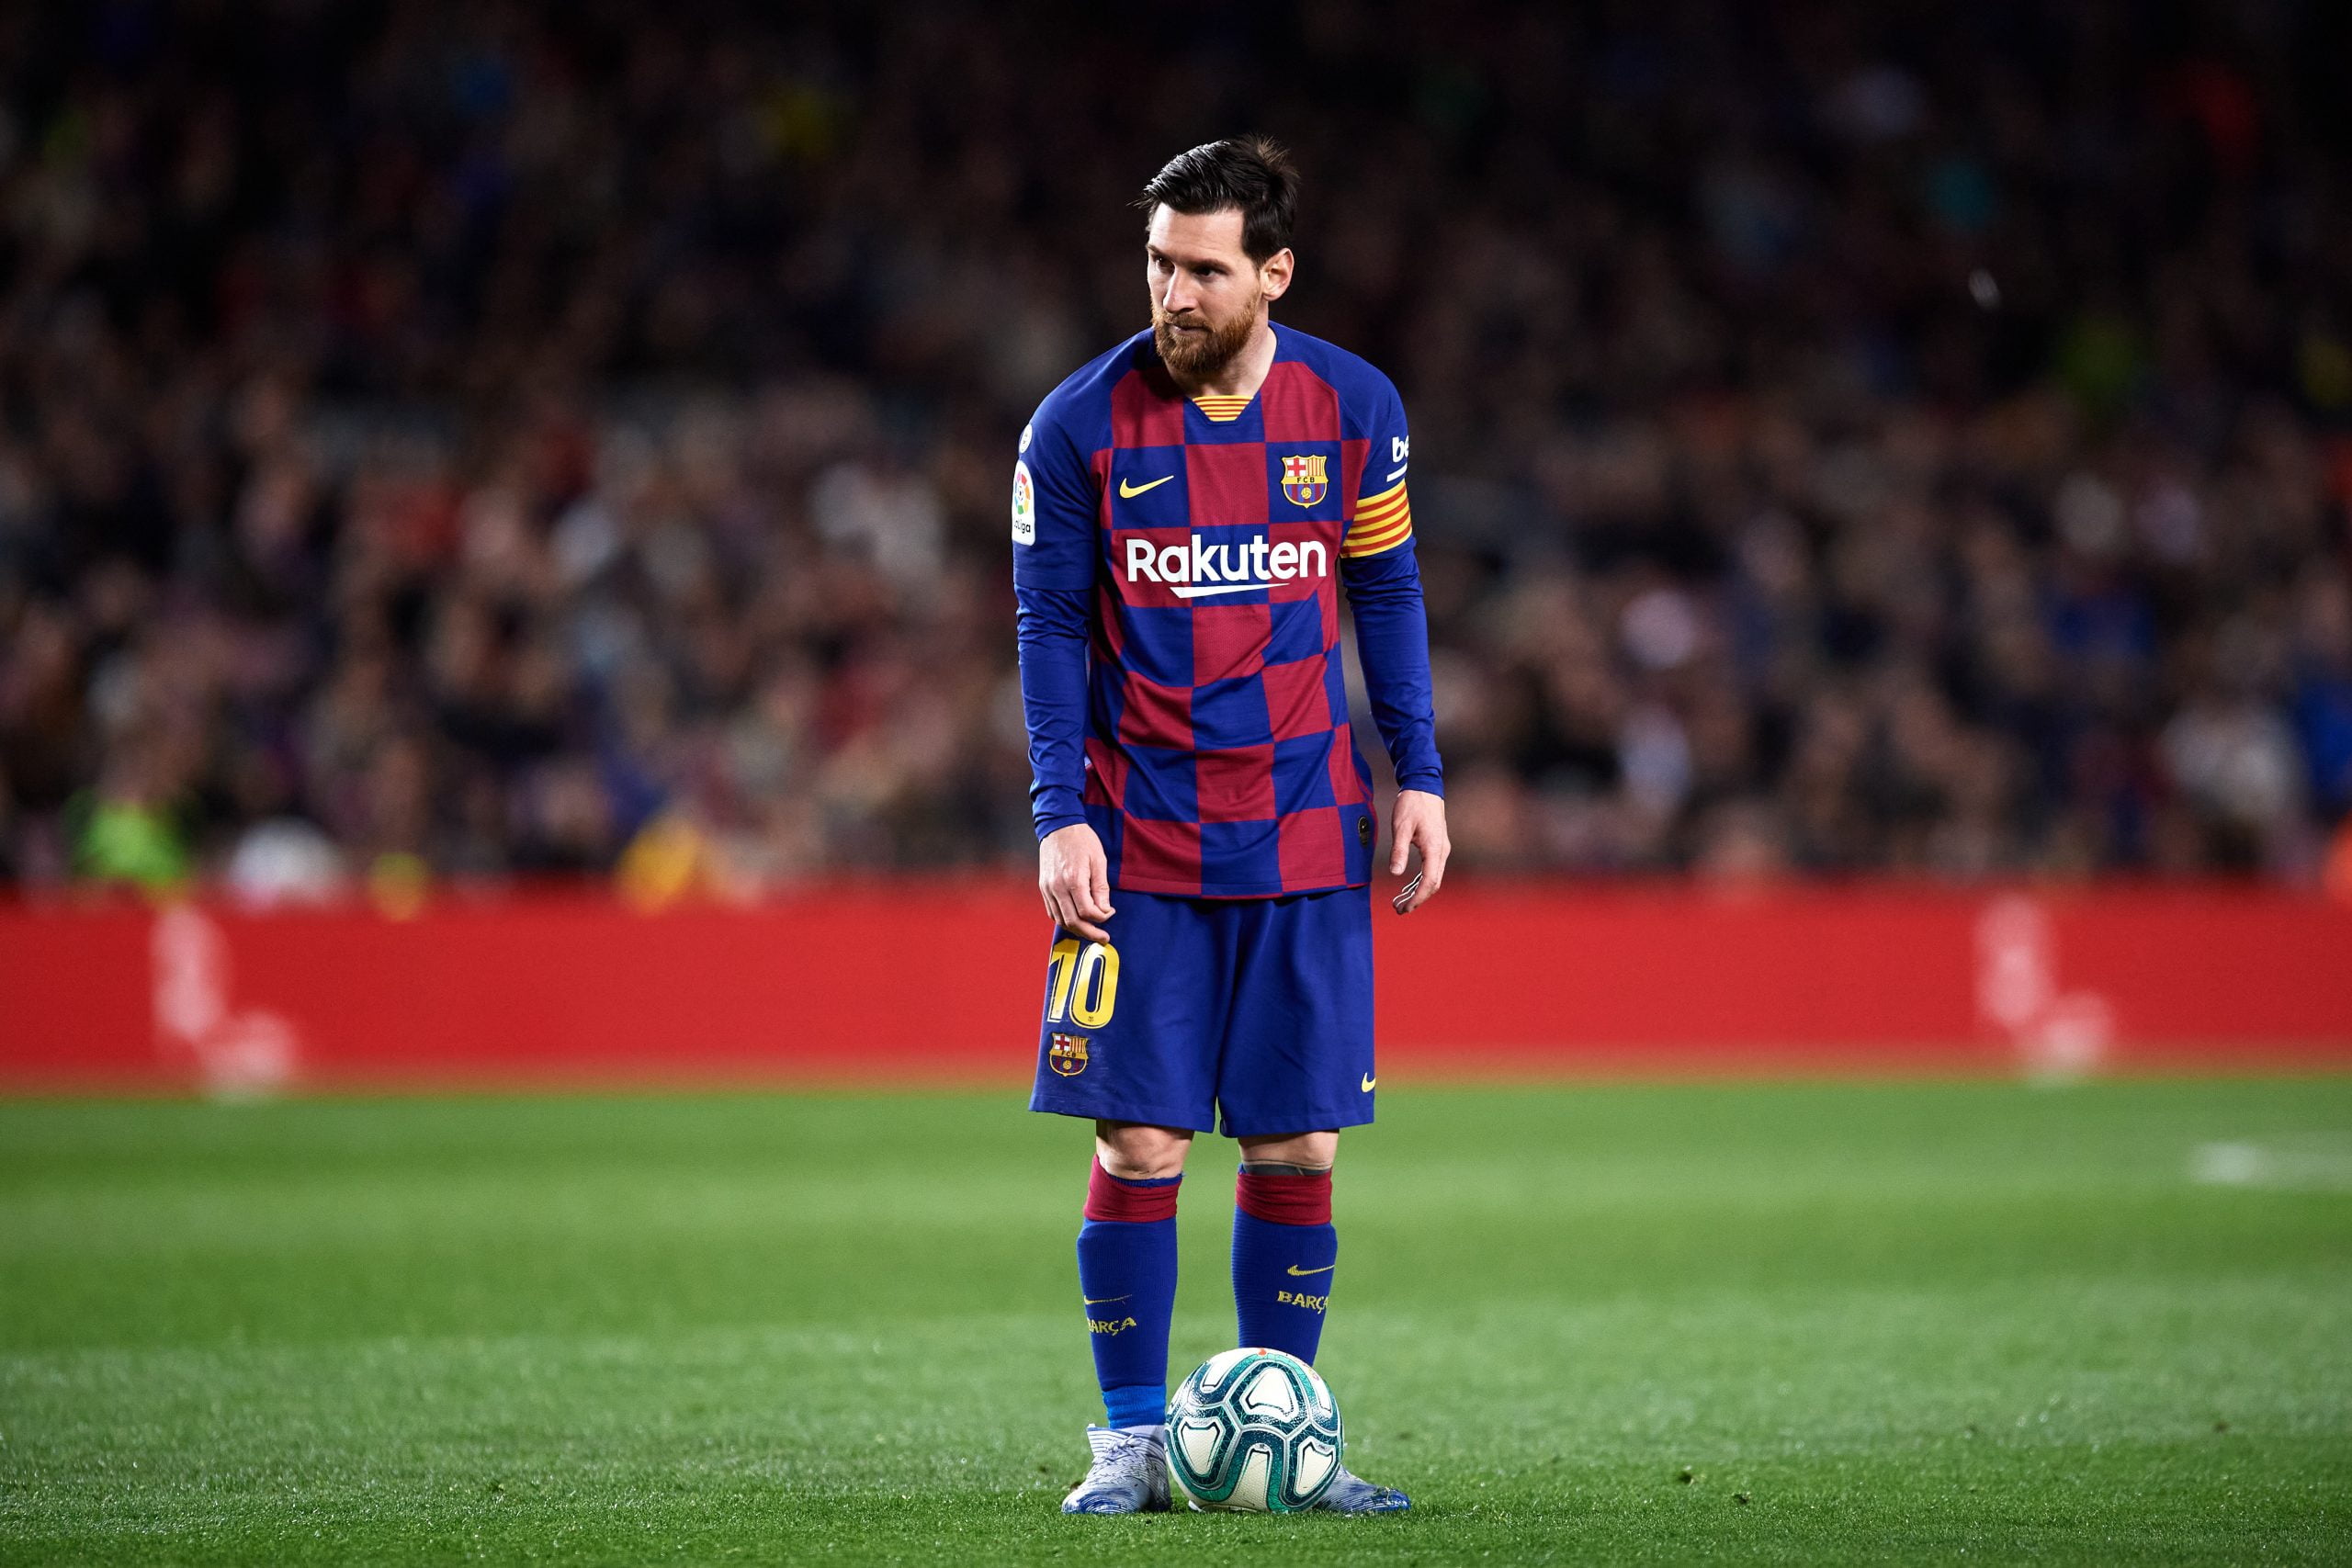 BARCELONA, SPAIN - MARCH 07: Lionel Messi of FC Barcelona prepares to kick a free kick during the Liga match between FC Barcelona and Real Sociedad at Camp Nou on March 07, 2020 in Barcelona, Spain. (Photo by Alex Caparros/Getty Images)